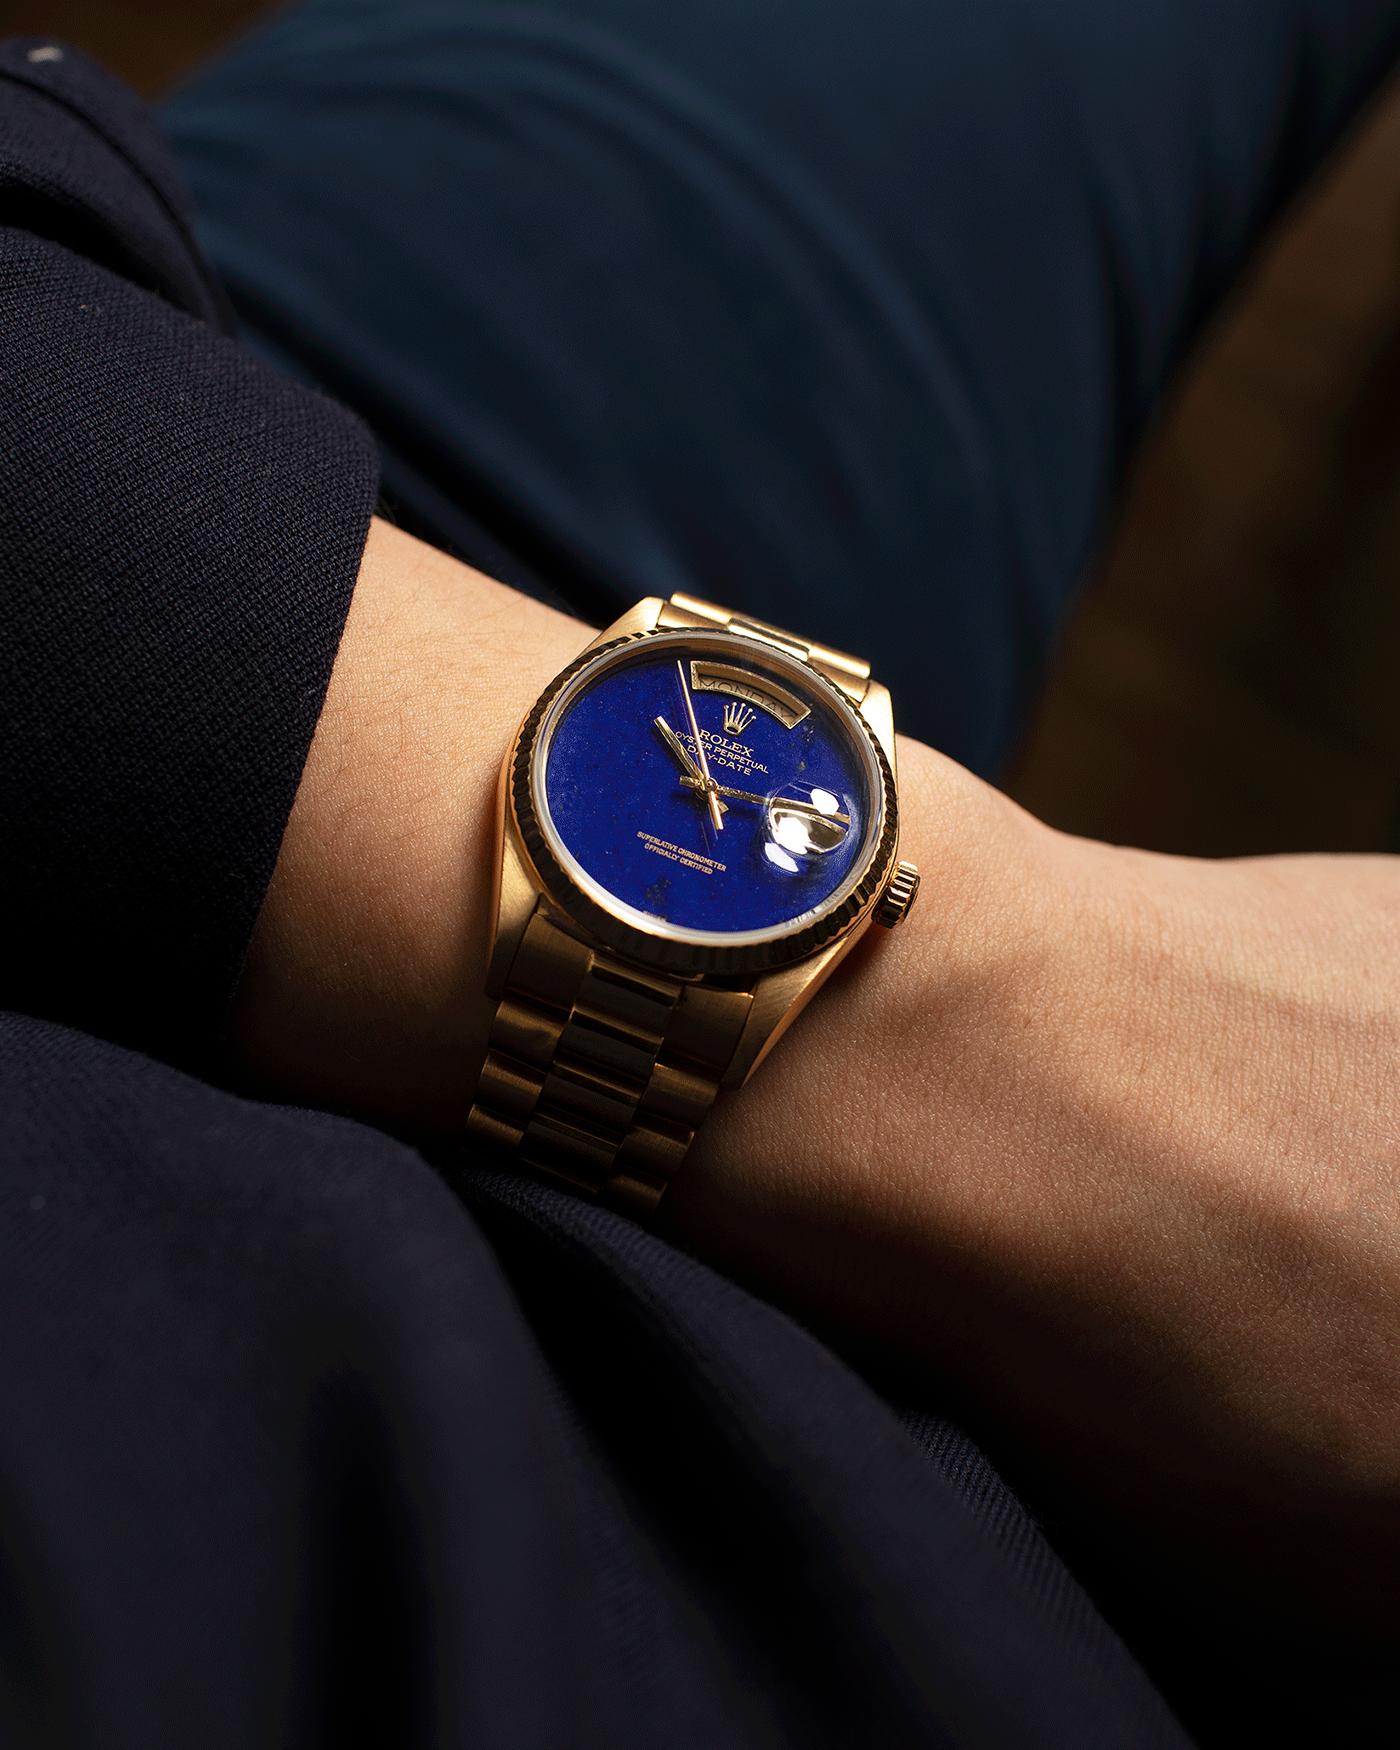 Brand: Rolex Year: 1984 Model: Day-Date Reference Number: 18038 Serial: 8,4XX,XXX Material: 18k Yellow Gold Movement: Cal. 3055 Case Diameter: 36mm Lug Width: 20mm Bracelet/Strap: Rolex 838518k Solid Gold President Bracelet